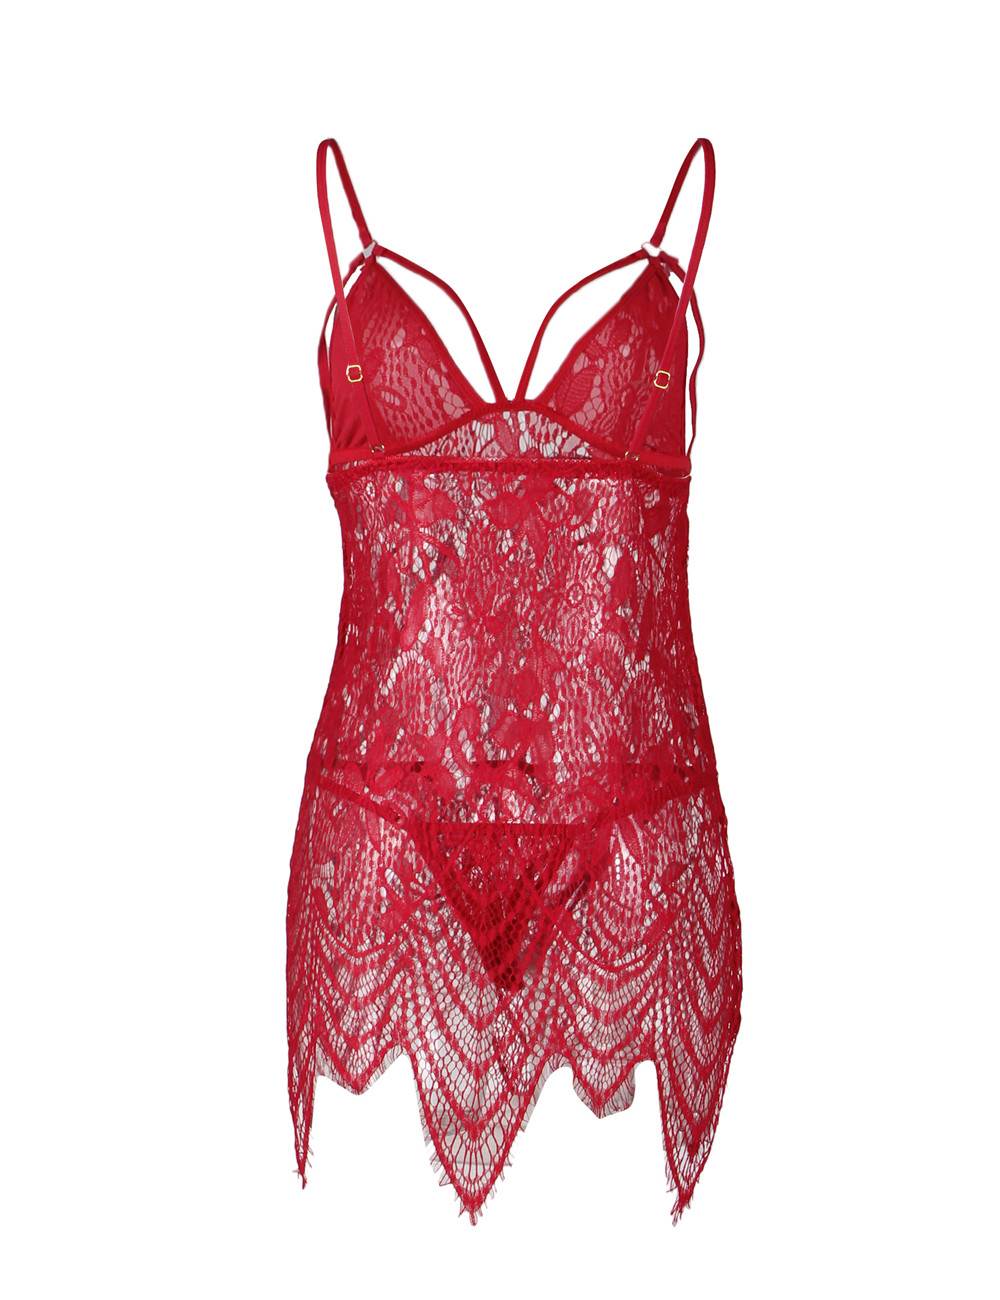 Sexy Lingerie,Teddy,Dress For Valentine's Day | Ohyeah888.com